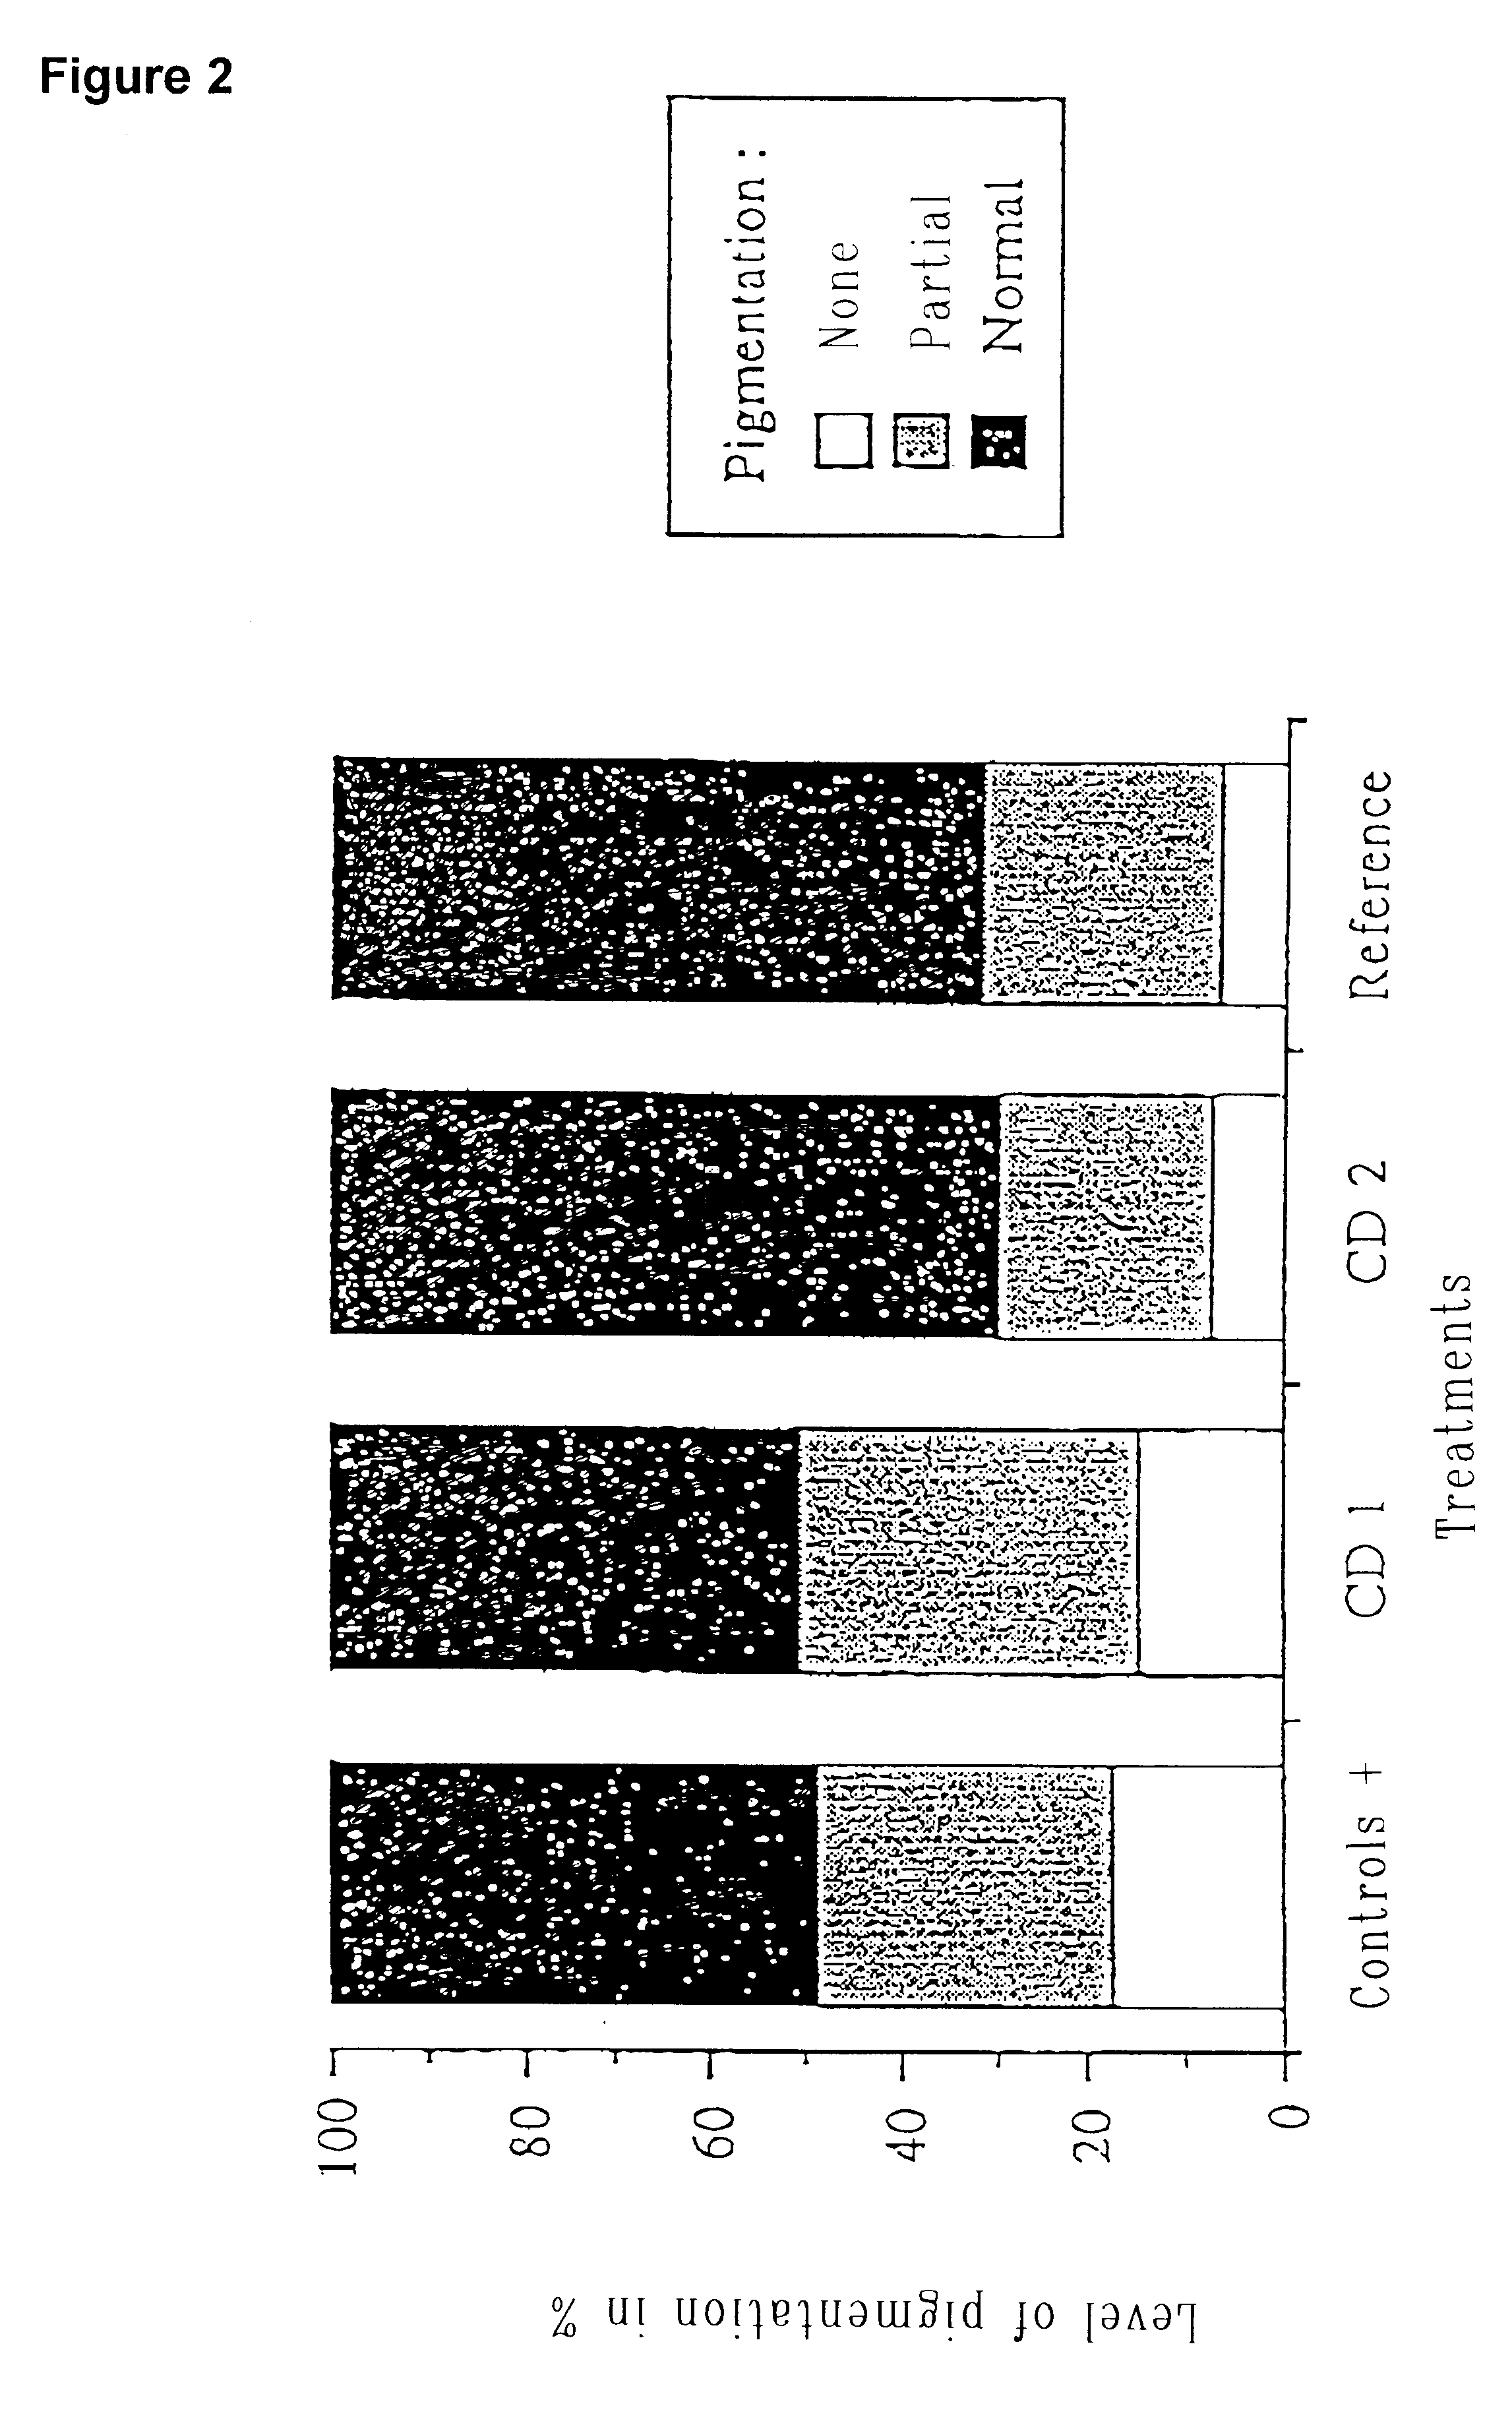 Depigmenting cosmetic skin-care composition and use thereof